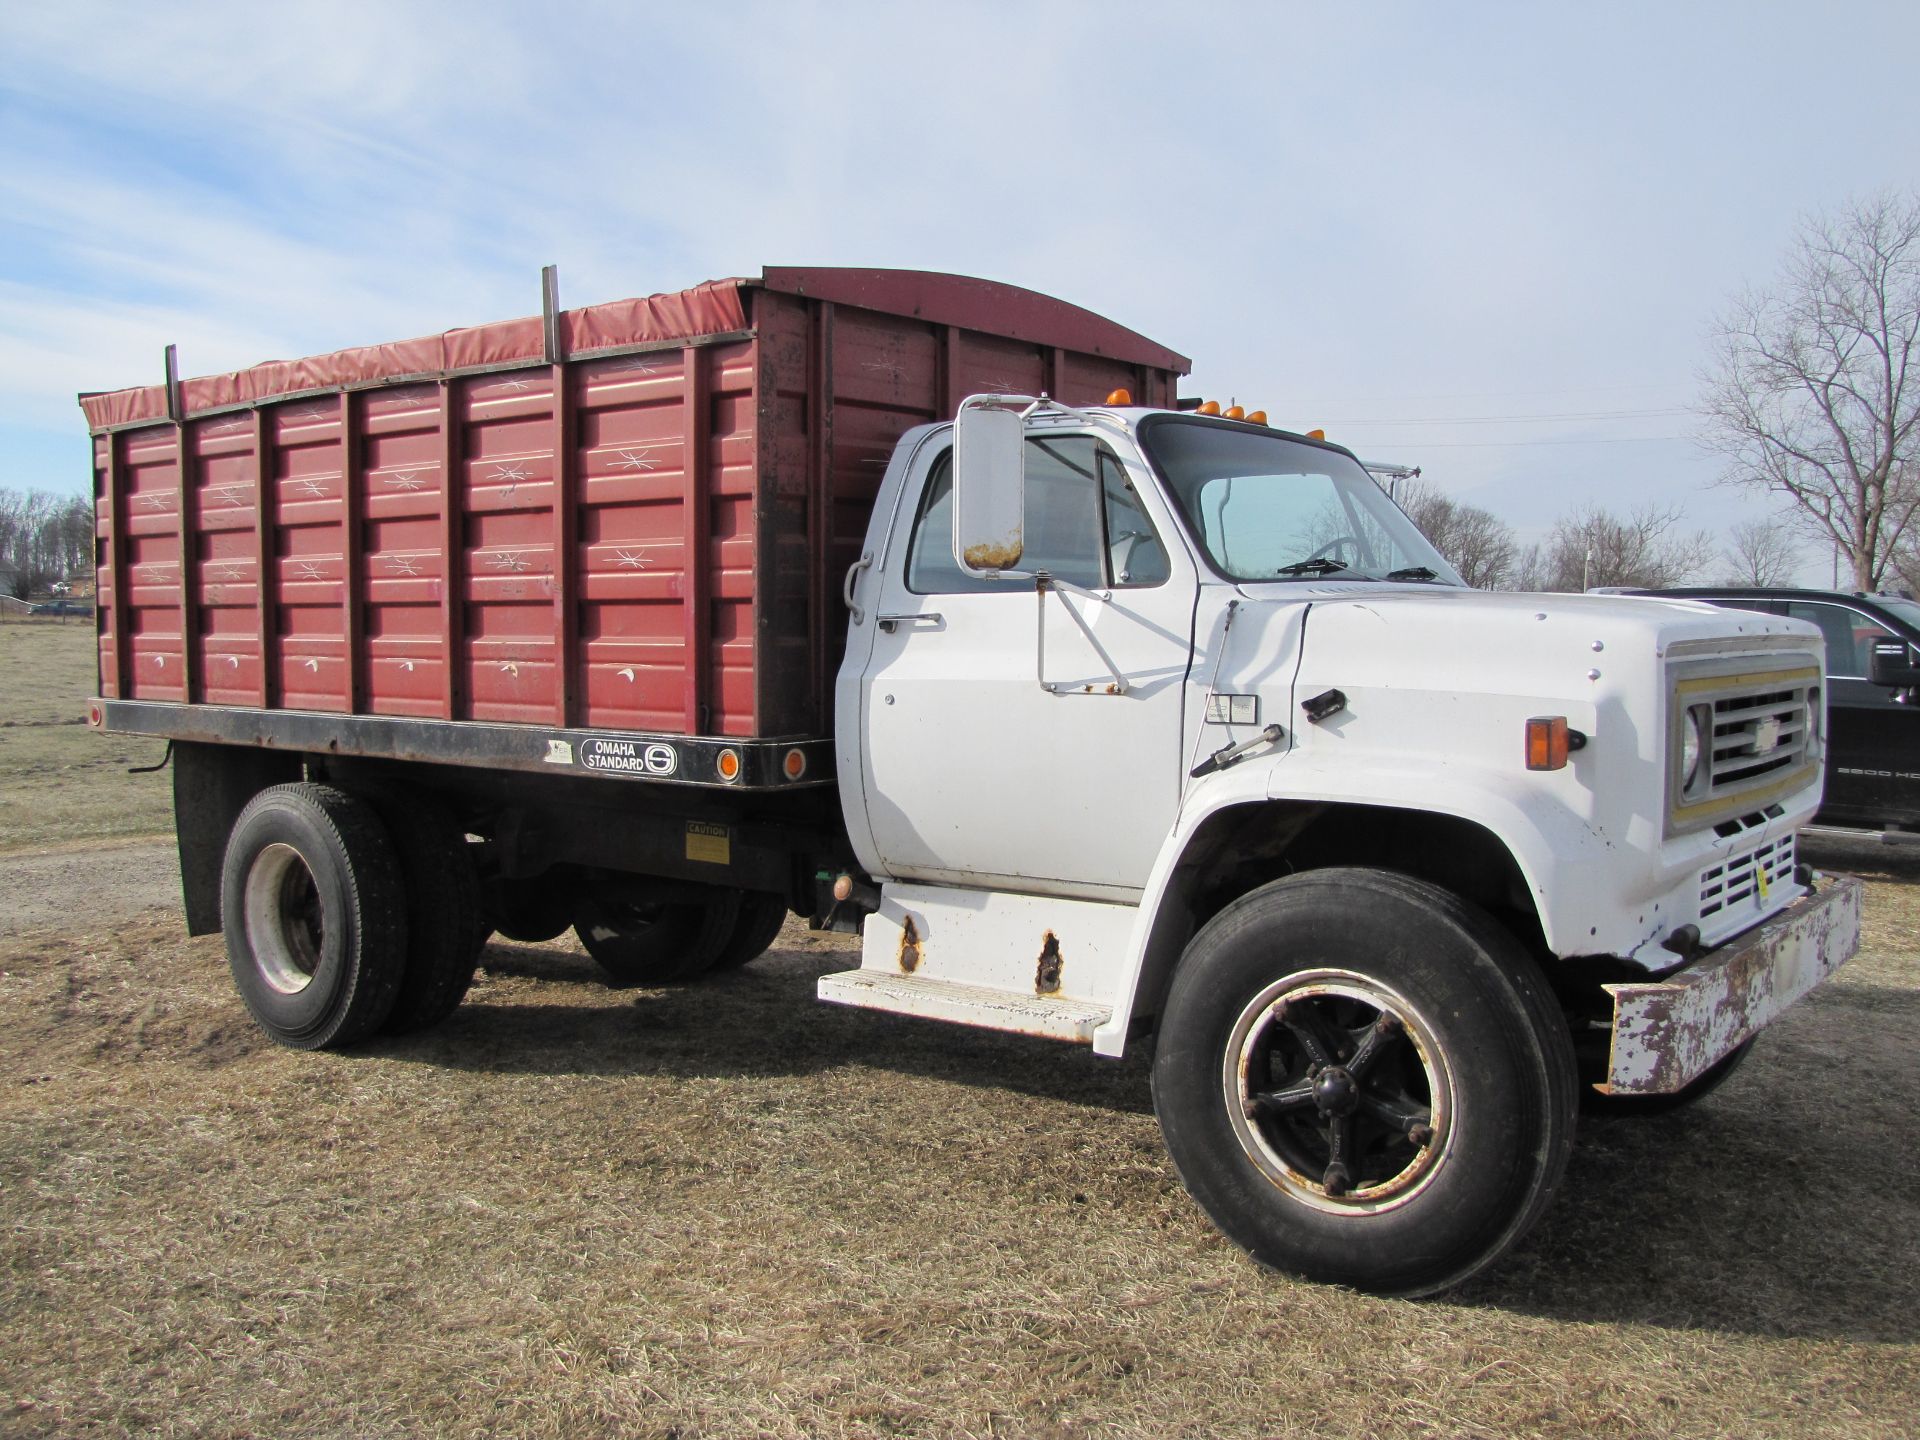 1983 Chevrolet C70 grain truck, 366 gas, 5+2 speed, single axle, 11R22.5 tires, shows 51,791 miles - Image 3 of 54